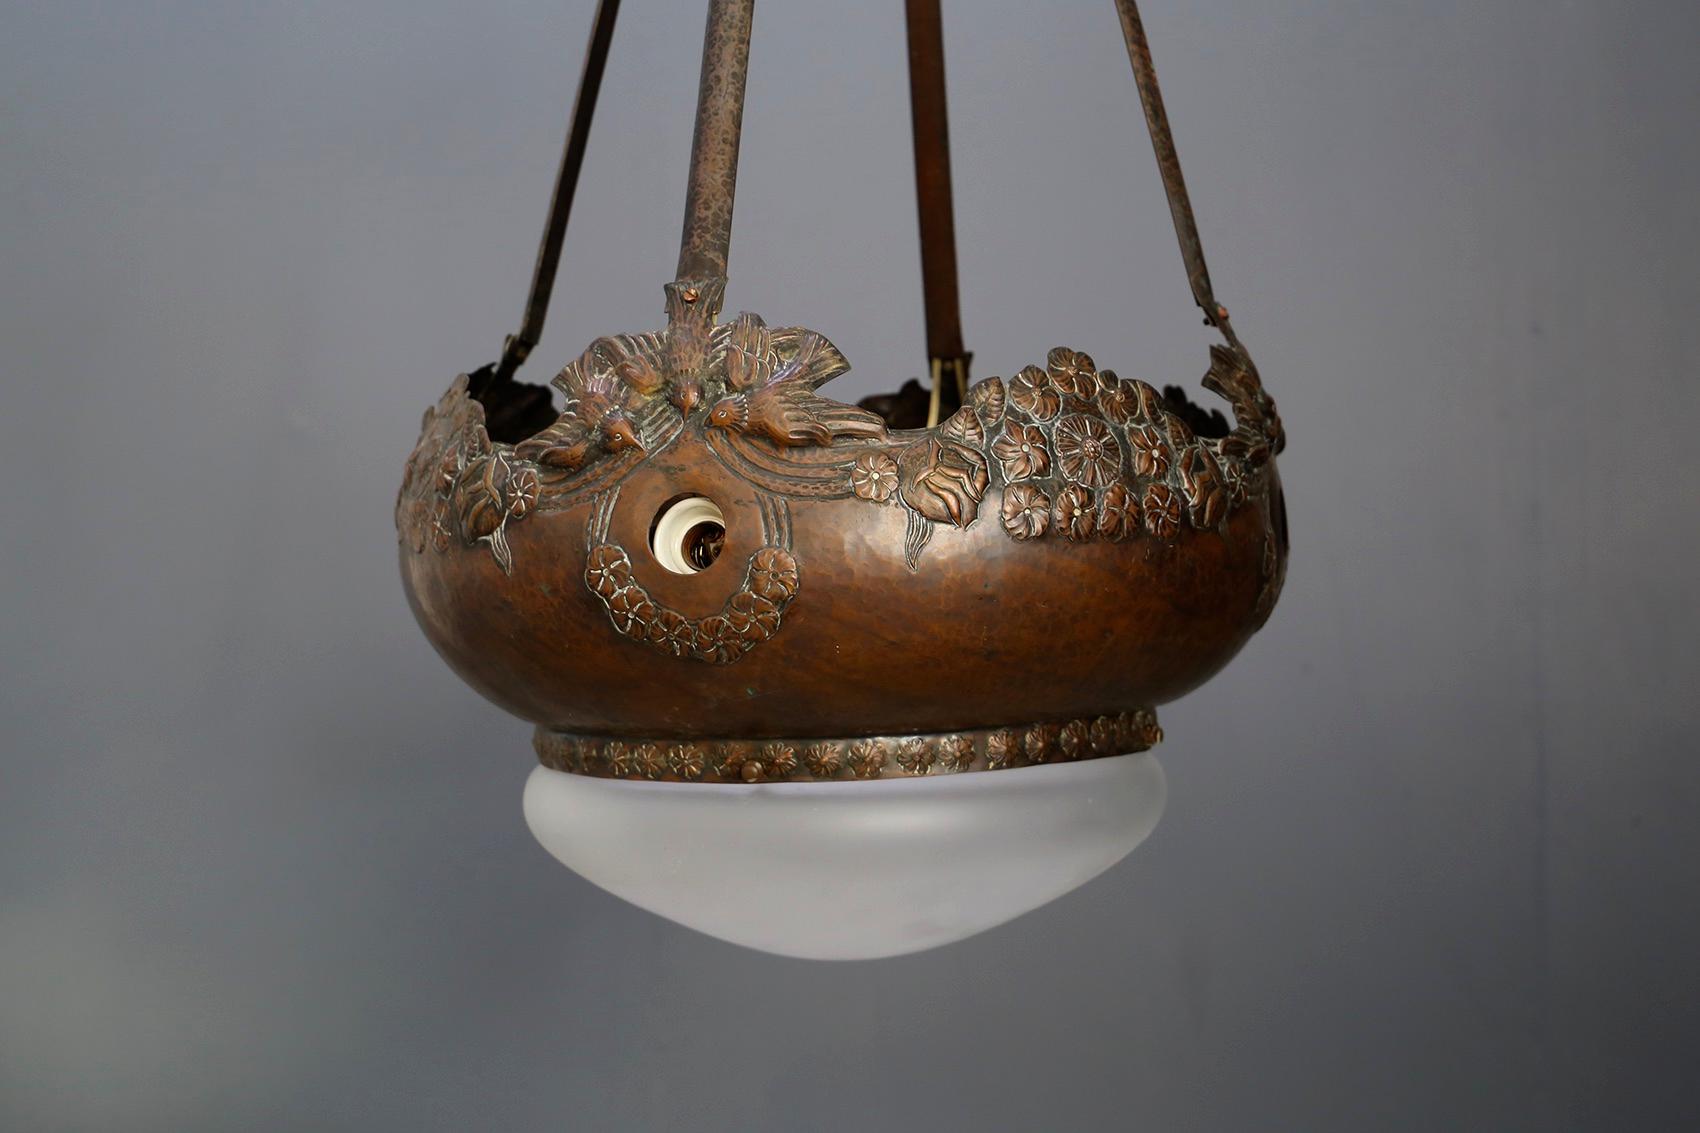 Large French Liberty style pendant chandelier. The chandelier is made of finely sculpted copper. As the Art Nouveau style wants we find floral elements well sculpted in copper to finish as an ornament. As lampshade to its lighting we find a semi